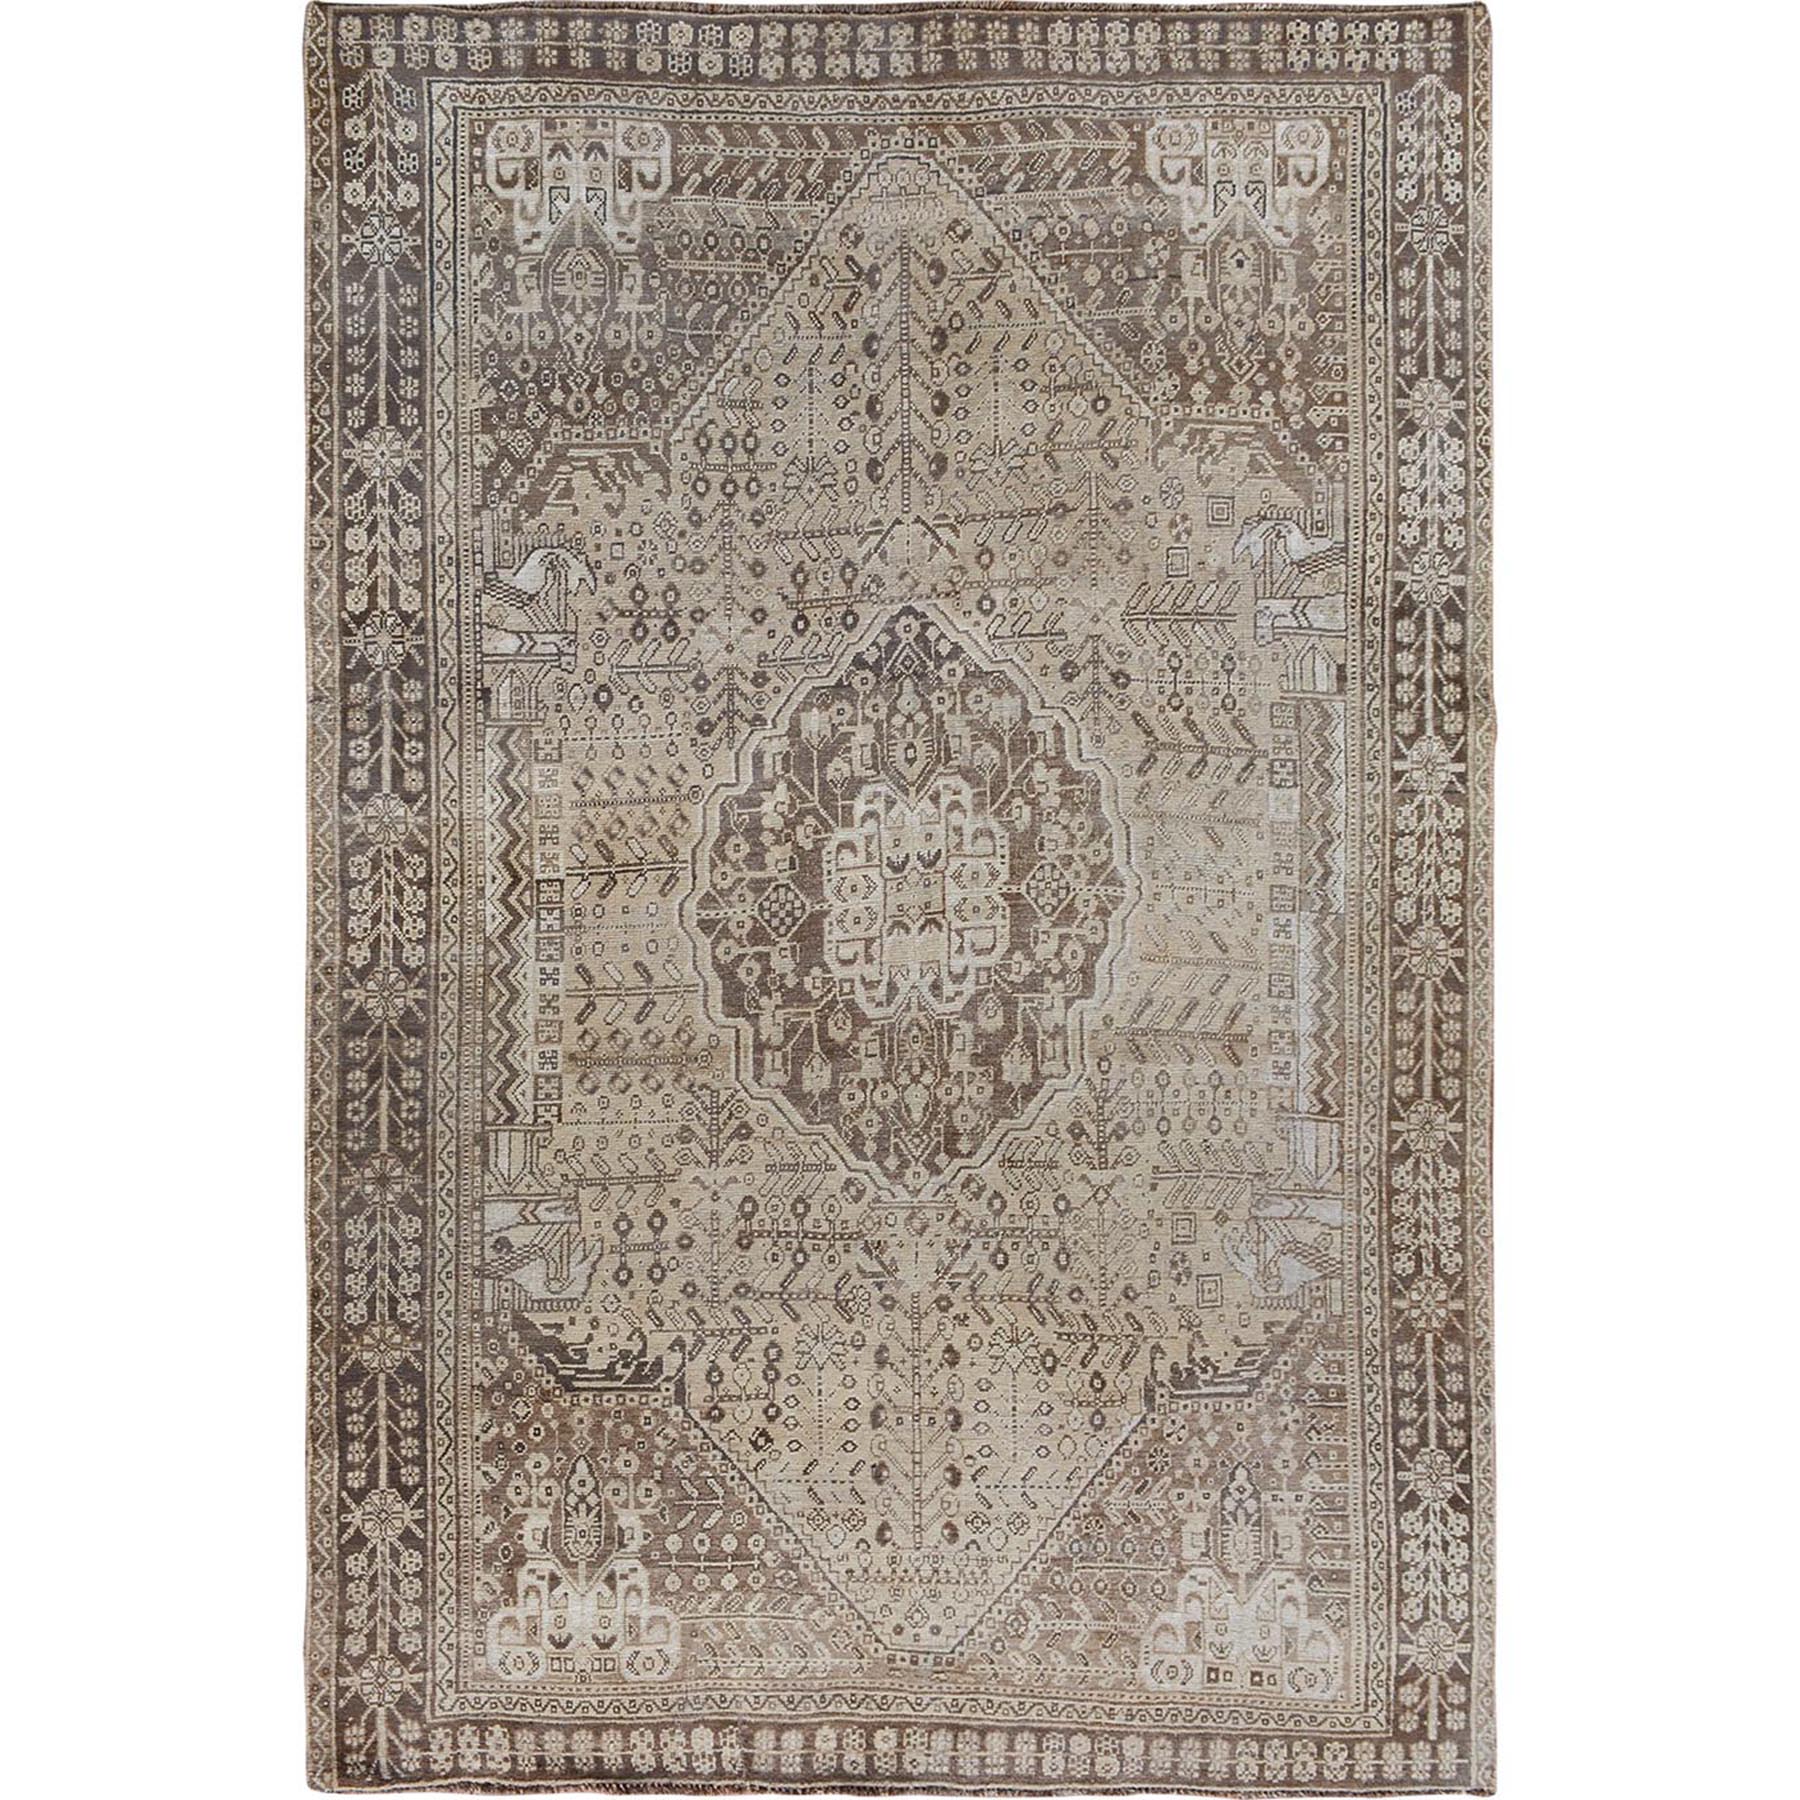 5'2"X7'7" Natural Colors Worn Down Vintage Persian Qashqai Pure Wool Hand Knotted Oriental Rug moae7b8d